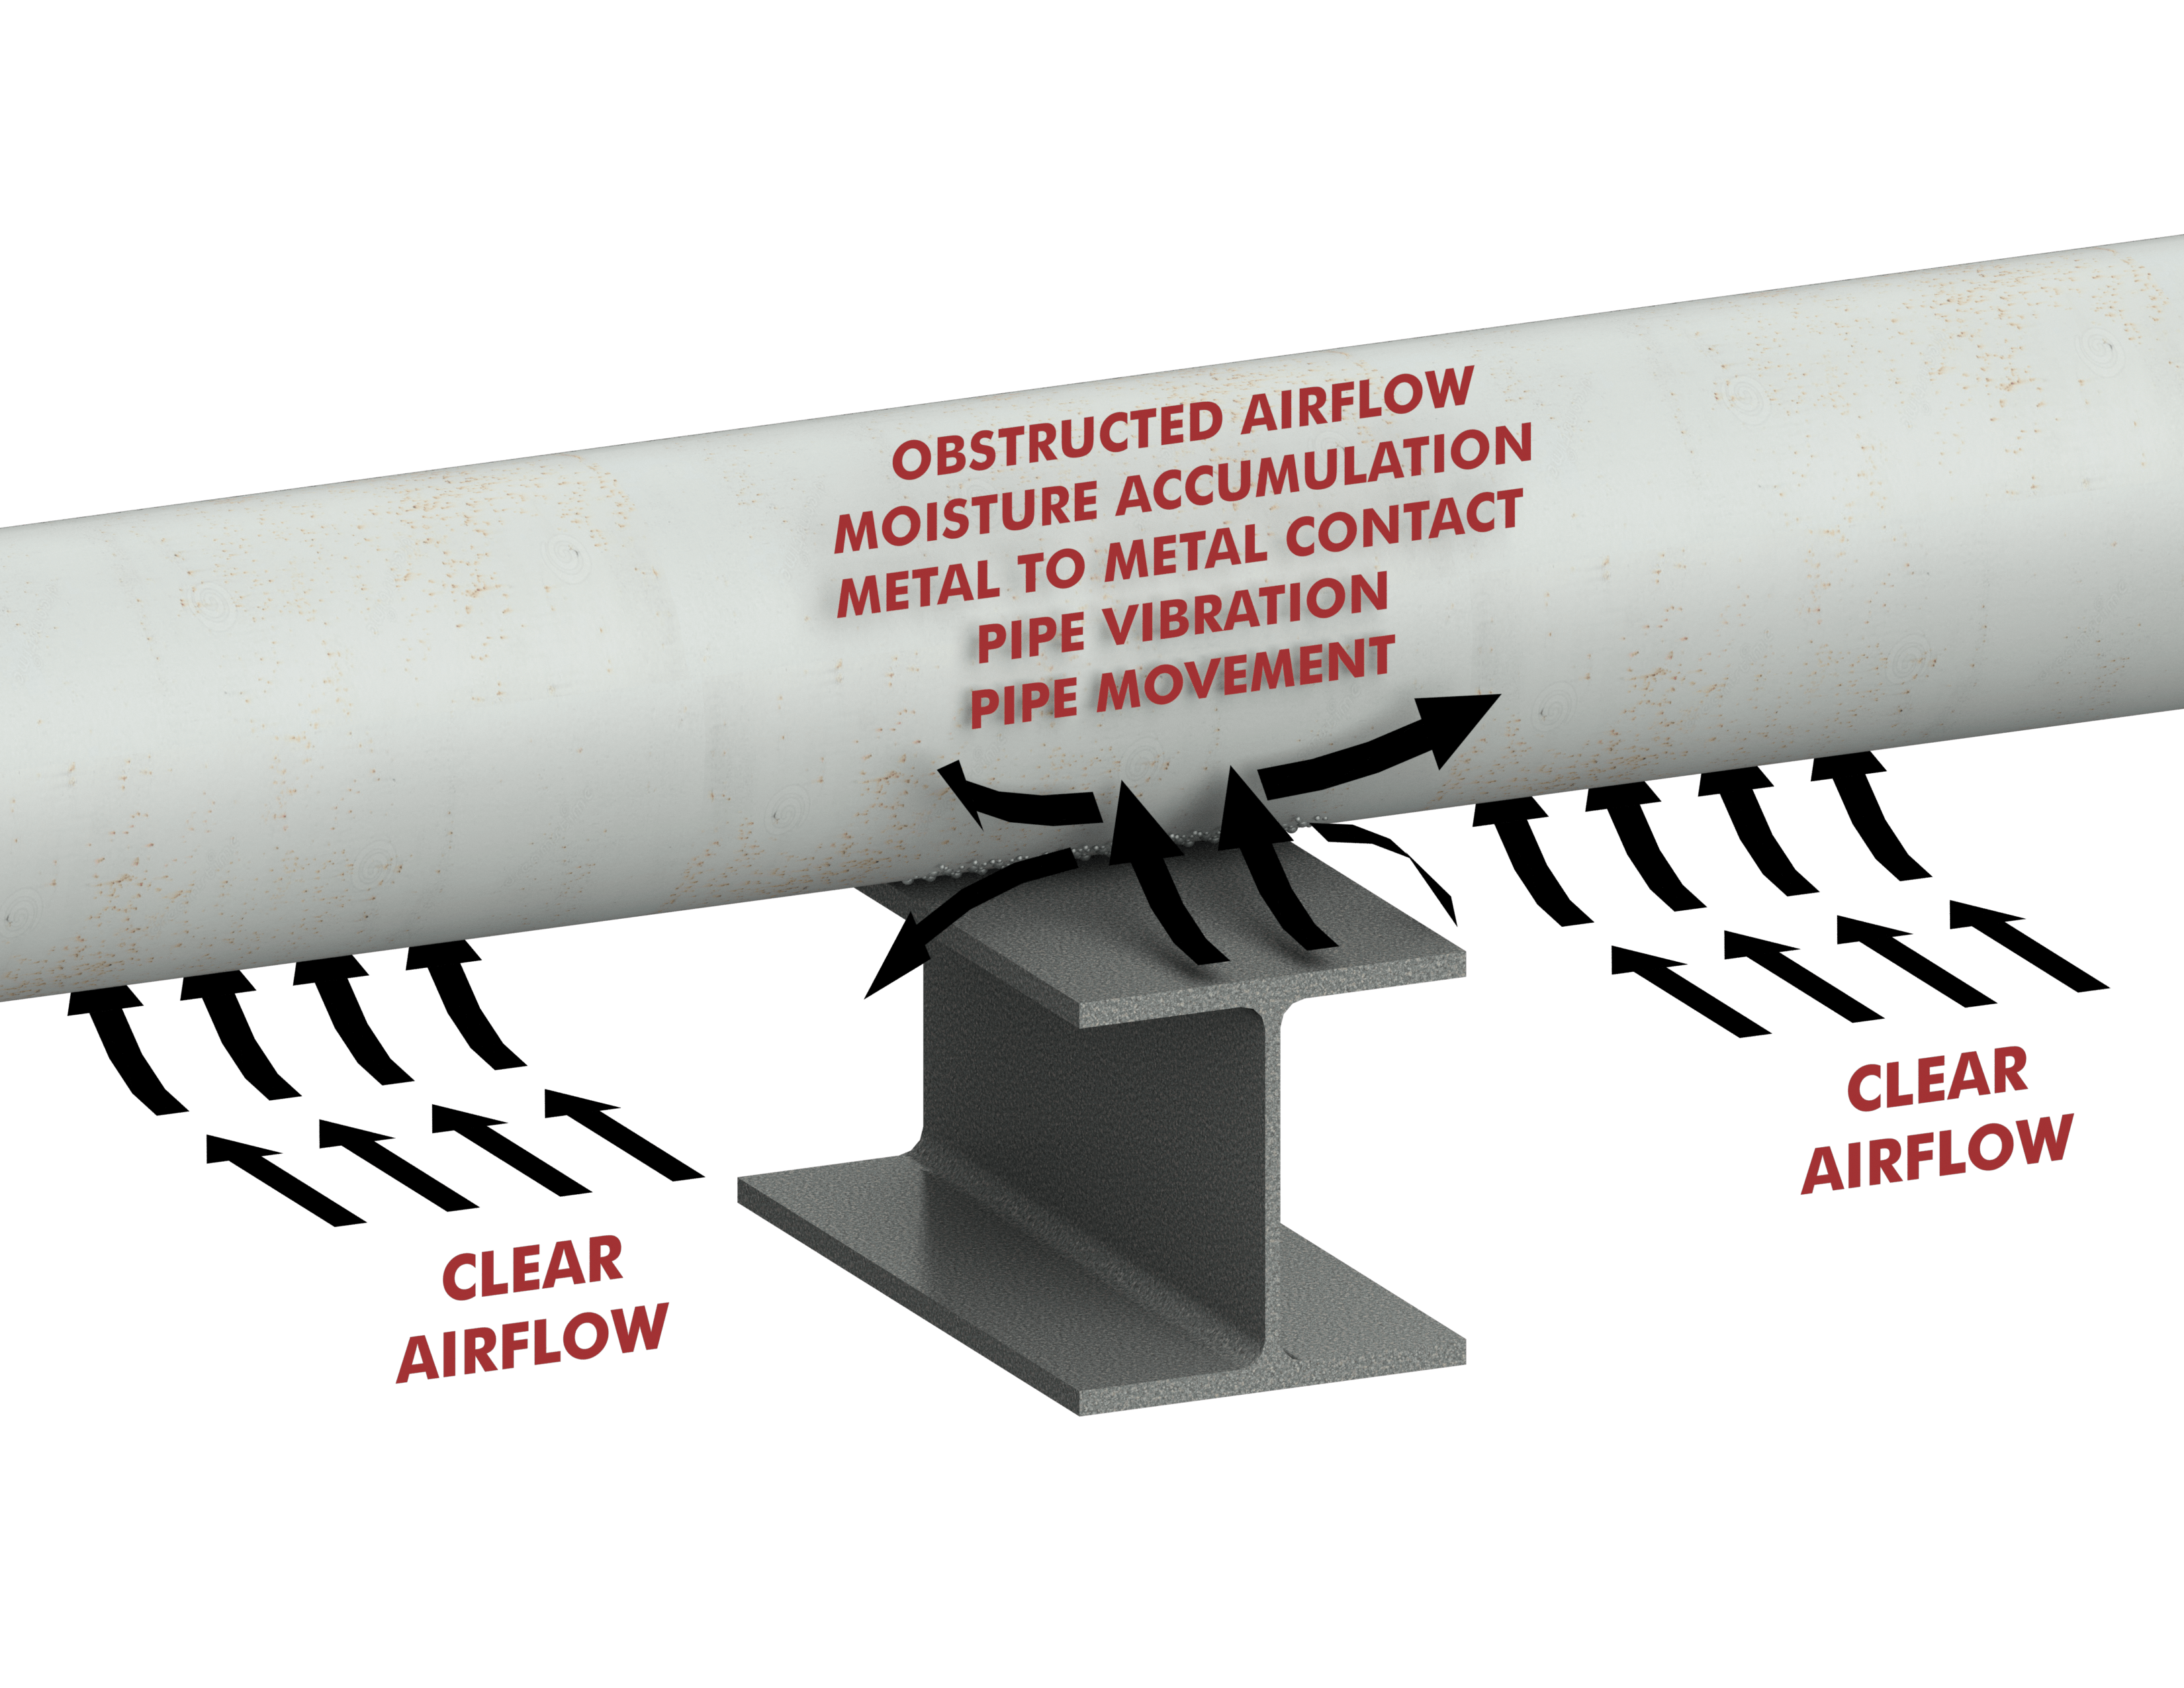 The graphic highlights factors causing corrosion under pipe supports.